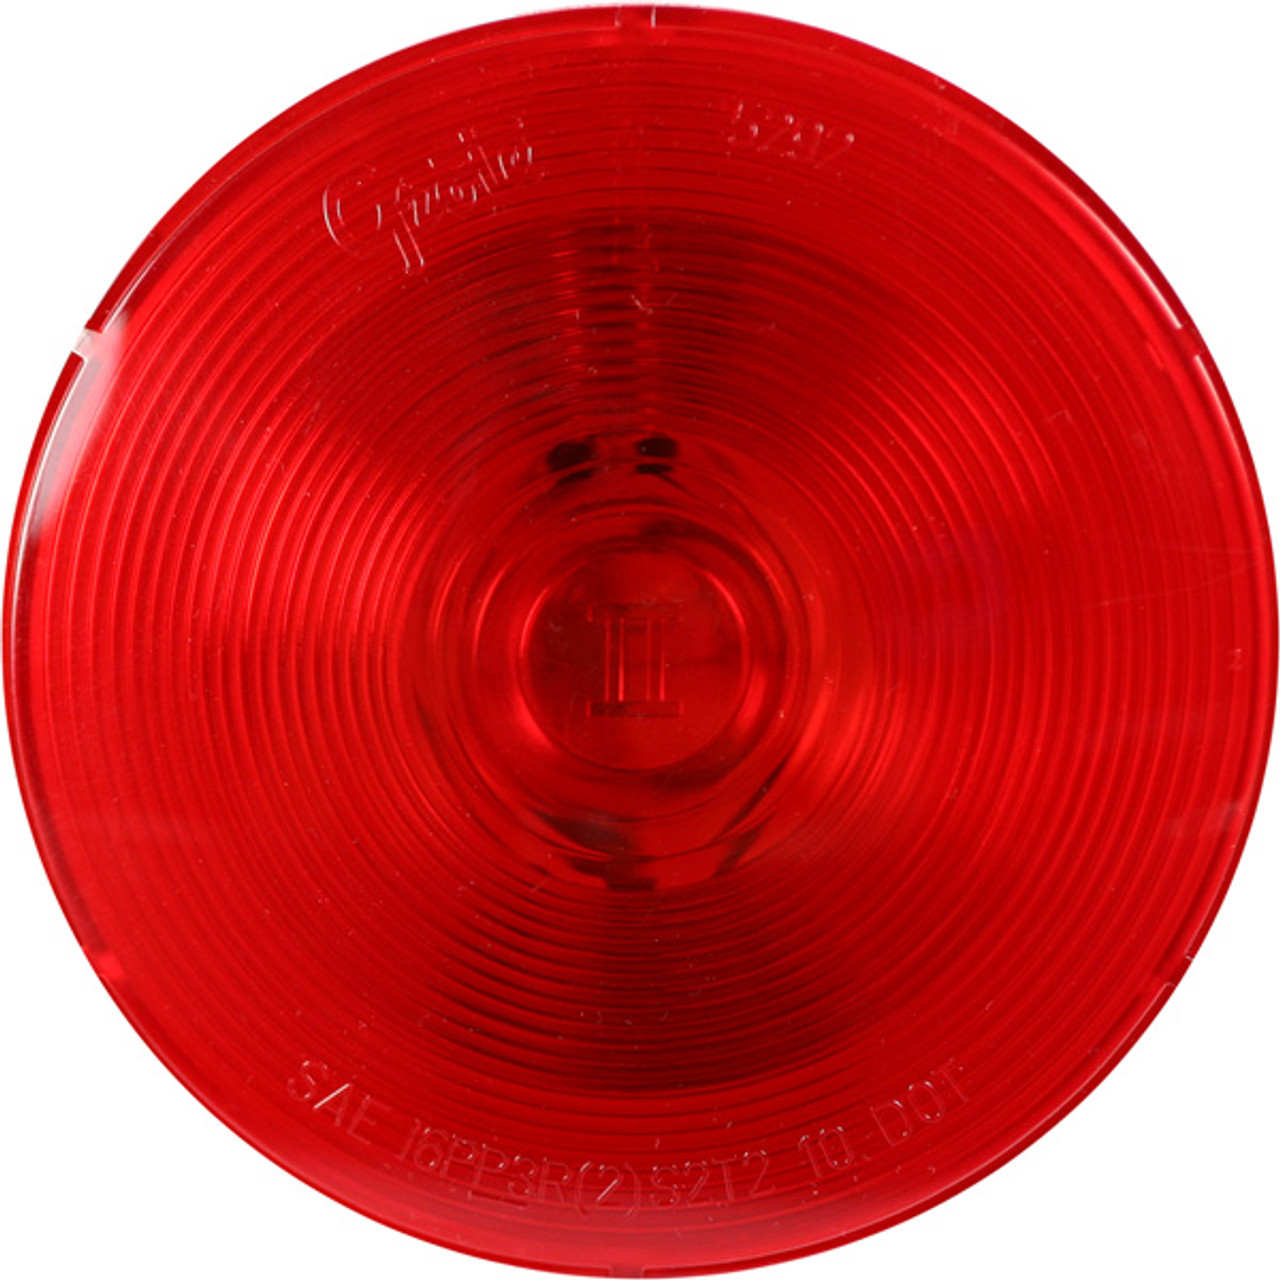 Grote 52152 4" Round Torsion Mount II S/T/T Lamp 24v- Red- Incandescent